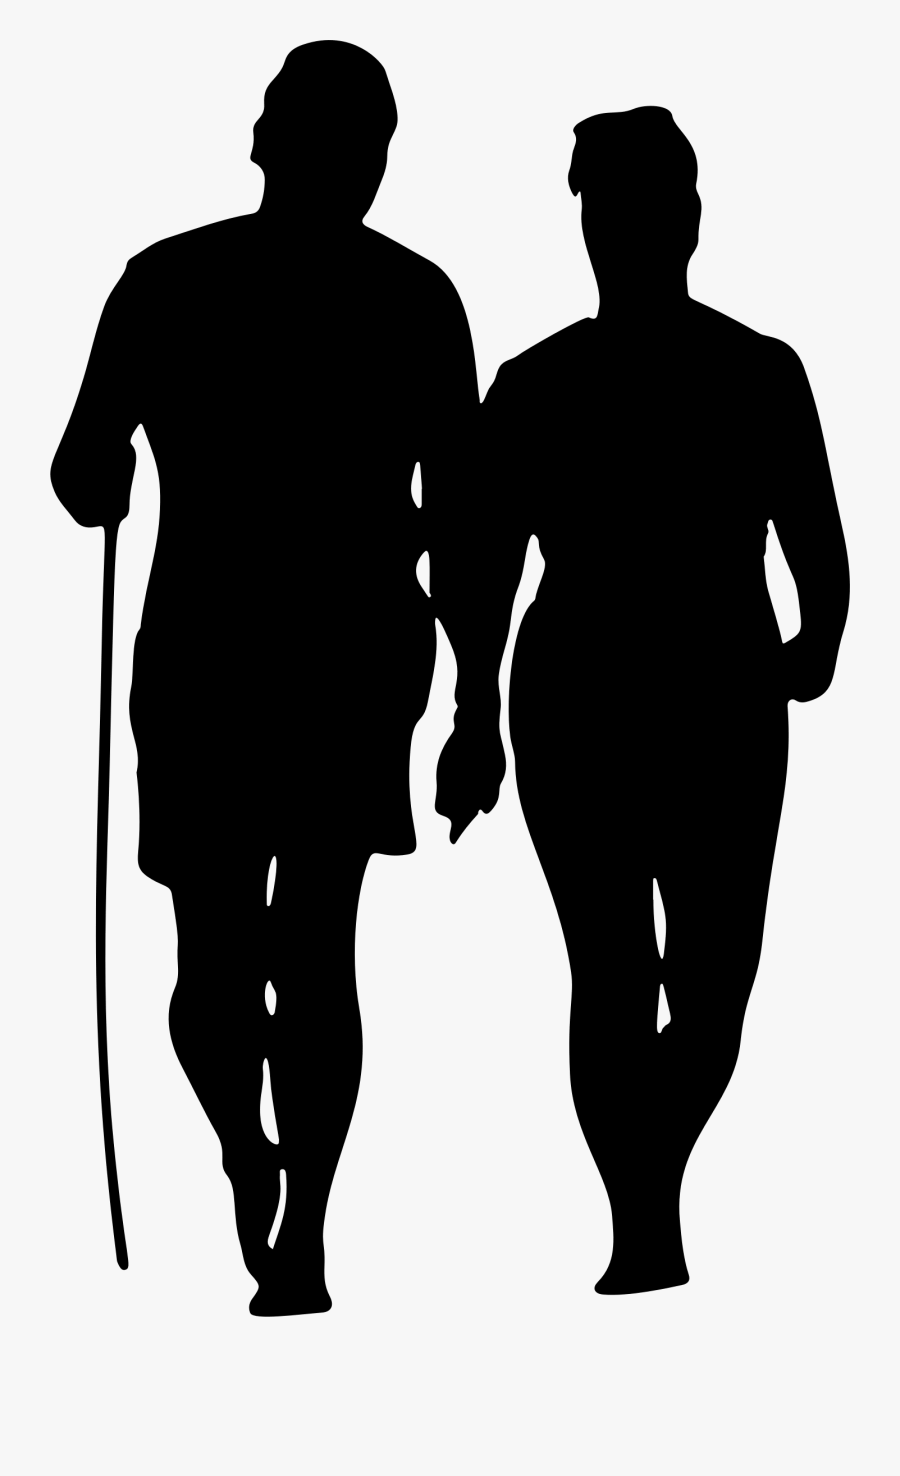 Walking Silhouette Png - Old Couple Walking Silhouette, Transparent Clipart